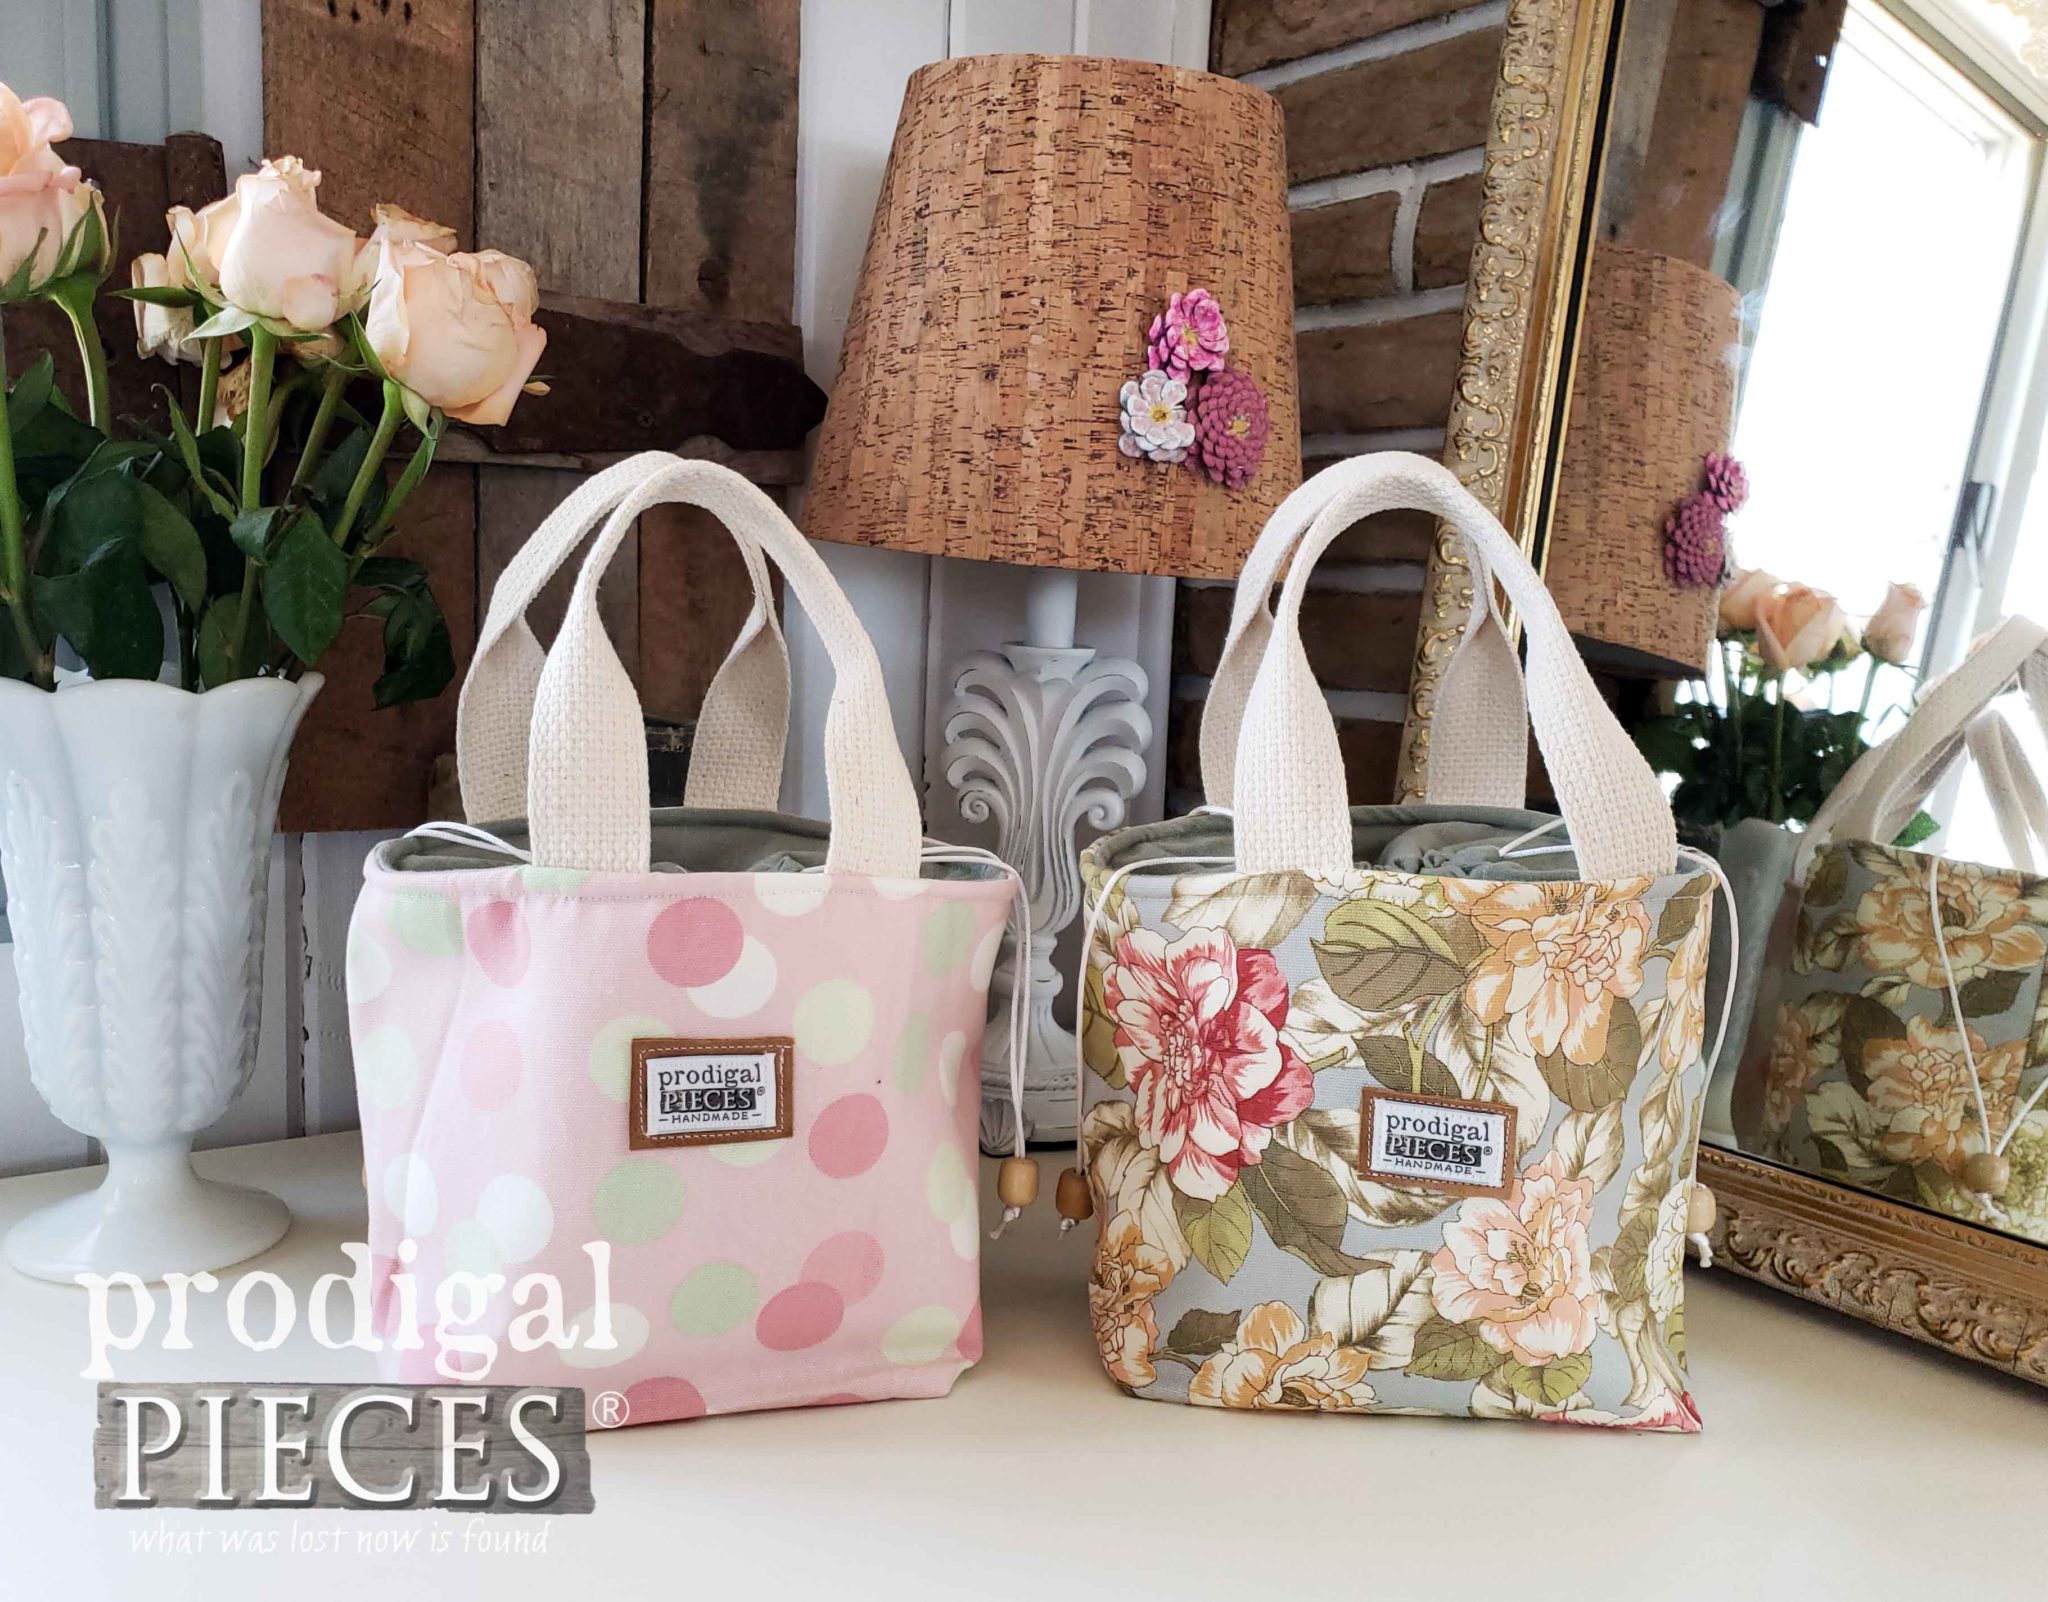 Floral & Polka Dot Insulated Lunch Bag Totes by Larissa of Prodigal Pieces | prodigalpieces.com #prodigalpieces #handmade #diy #home #fashion #accessories